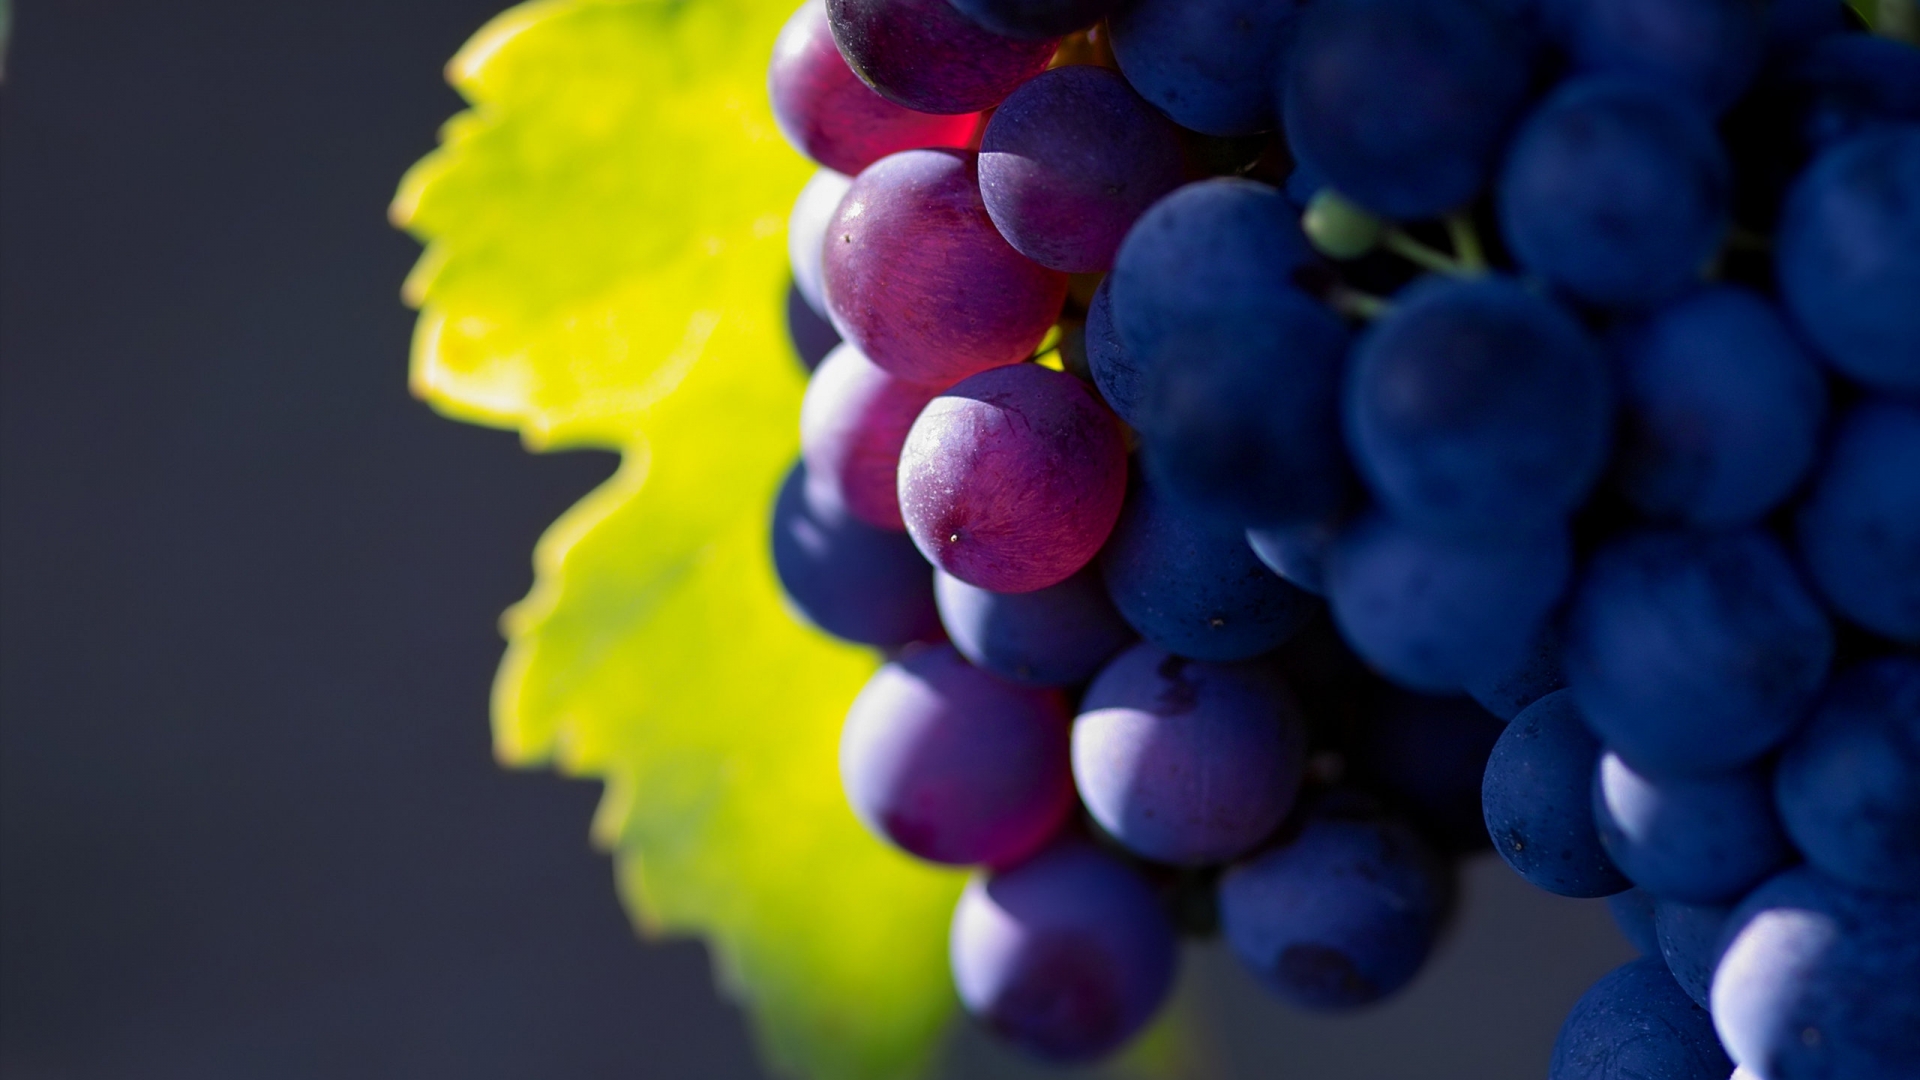 Bunch of Grapes for 1920 x 1080 HDTV 1080p resolution